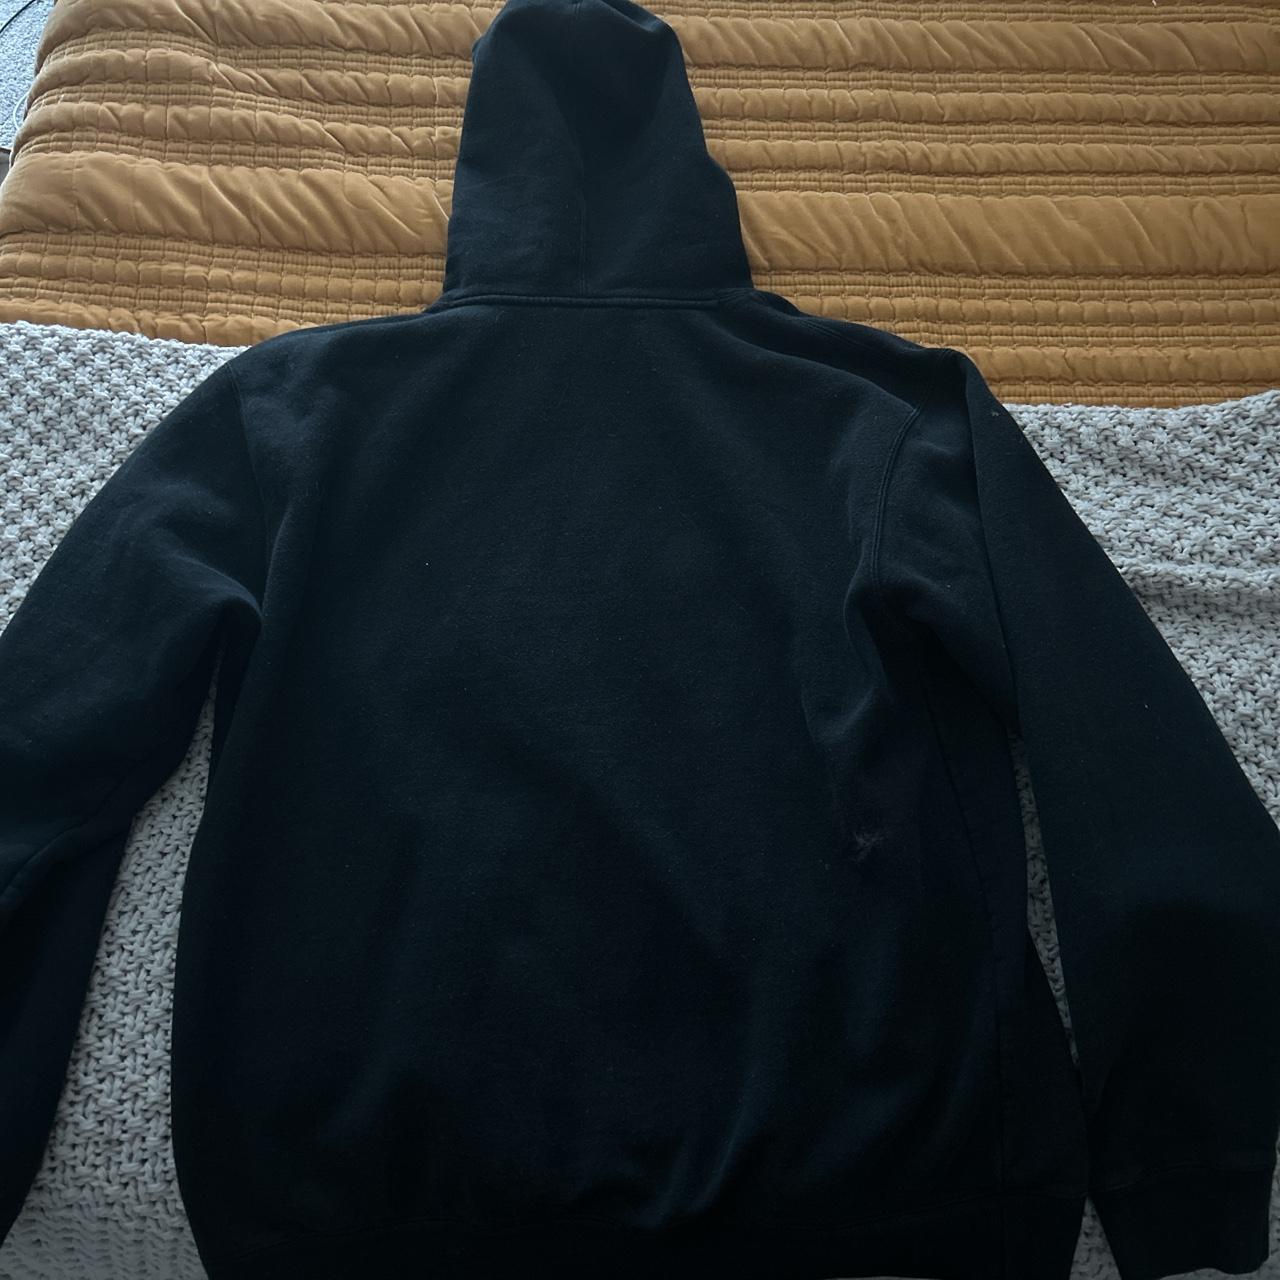 Obey hoodie! The size is a large I’m assuming in... - Depop